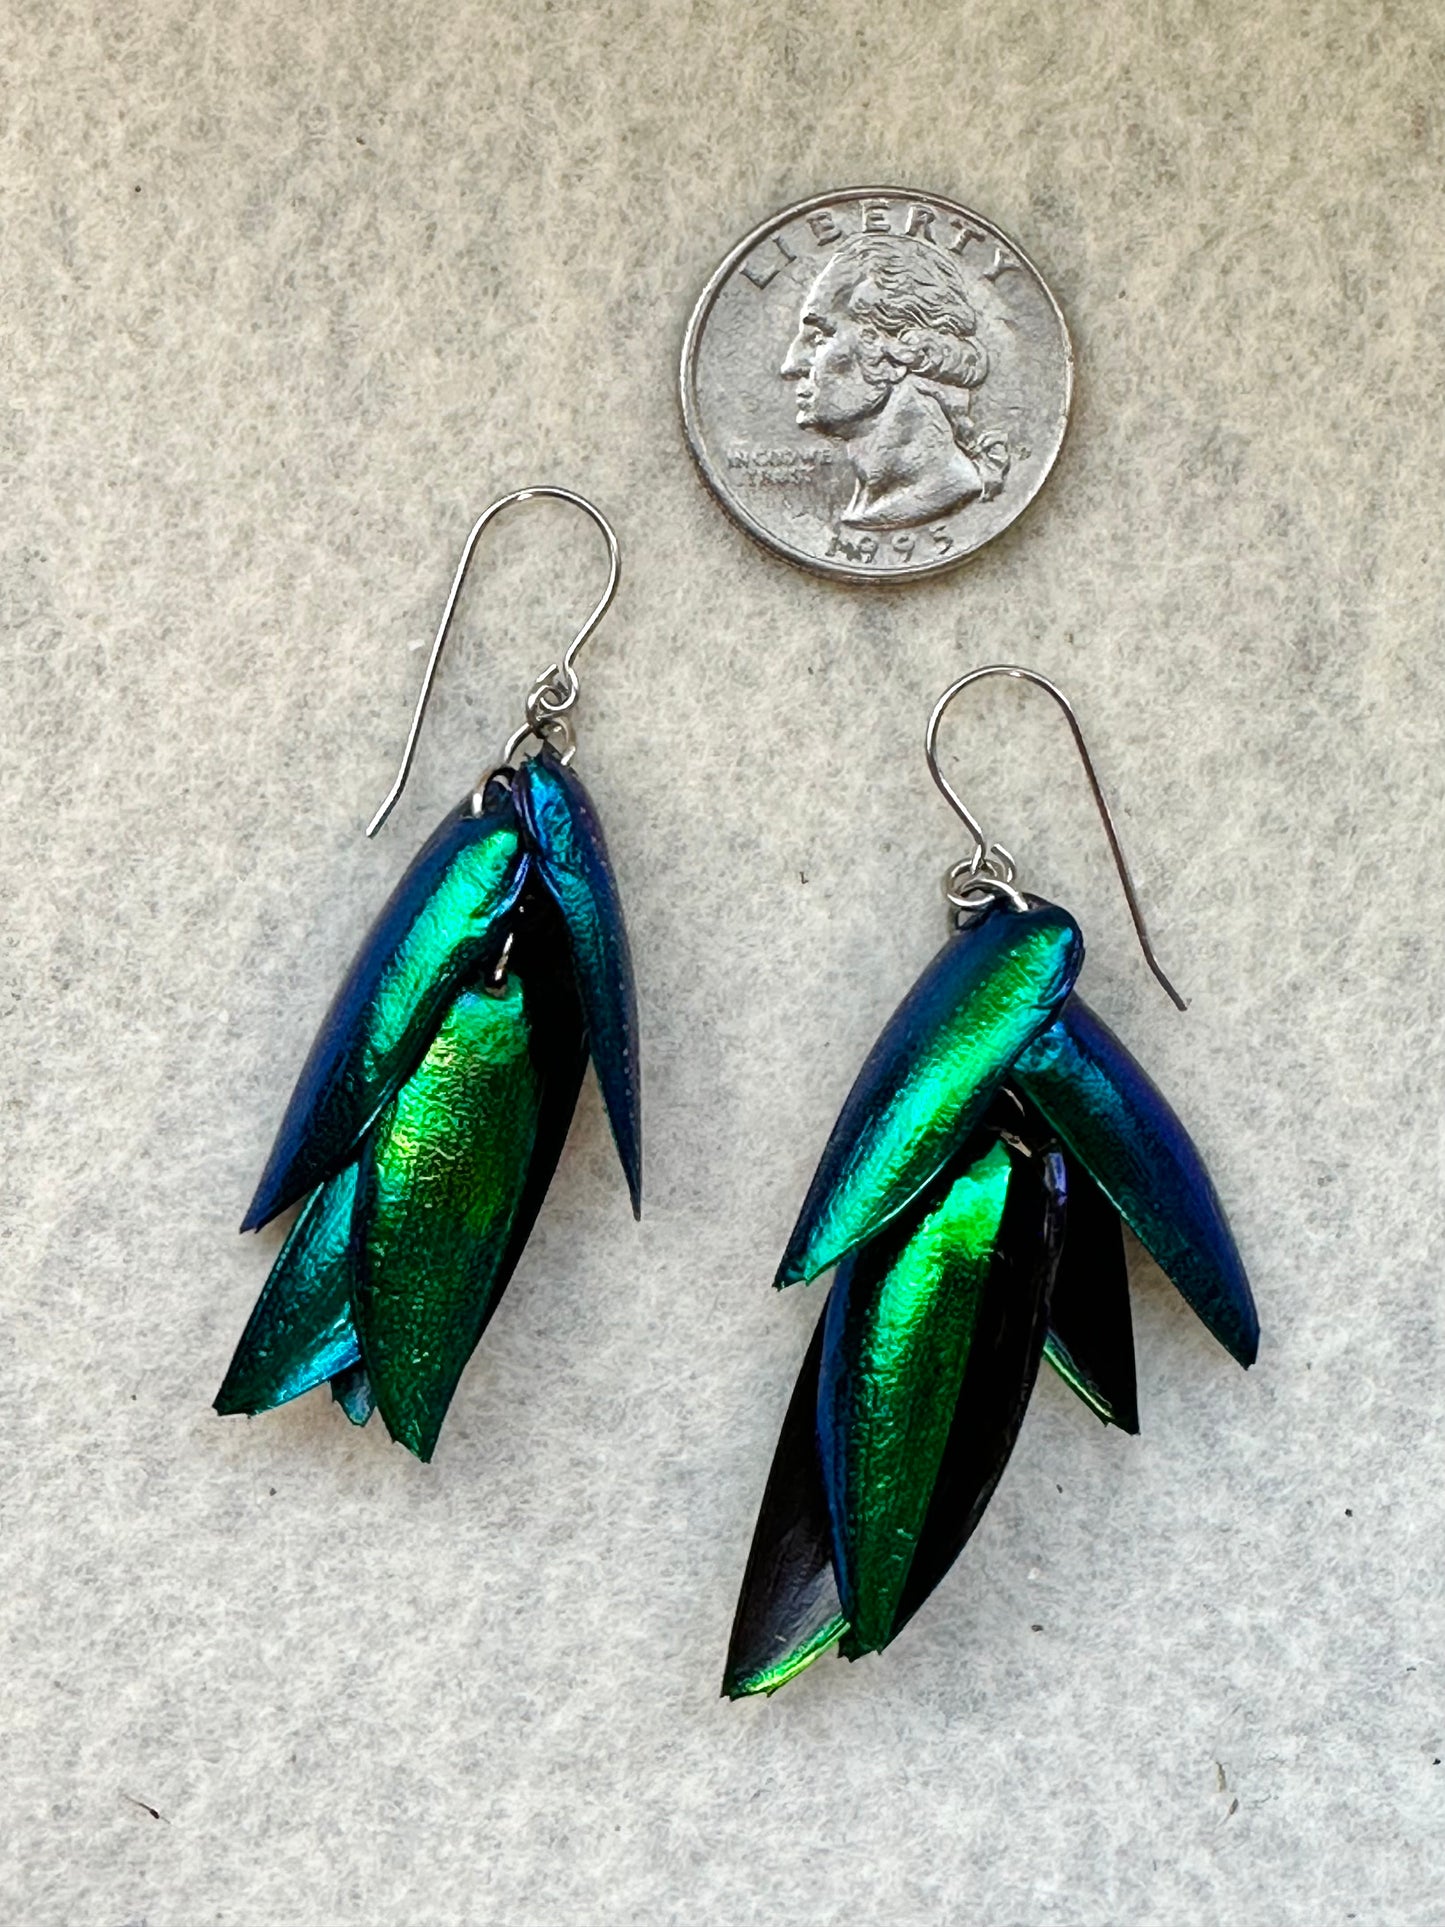 Bundle of Real Wing Earrings made from Elytra Beetles with Surgical Steel